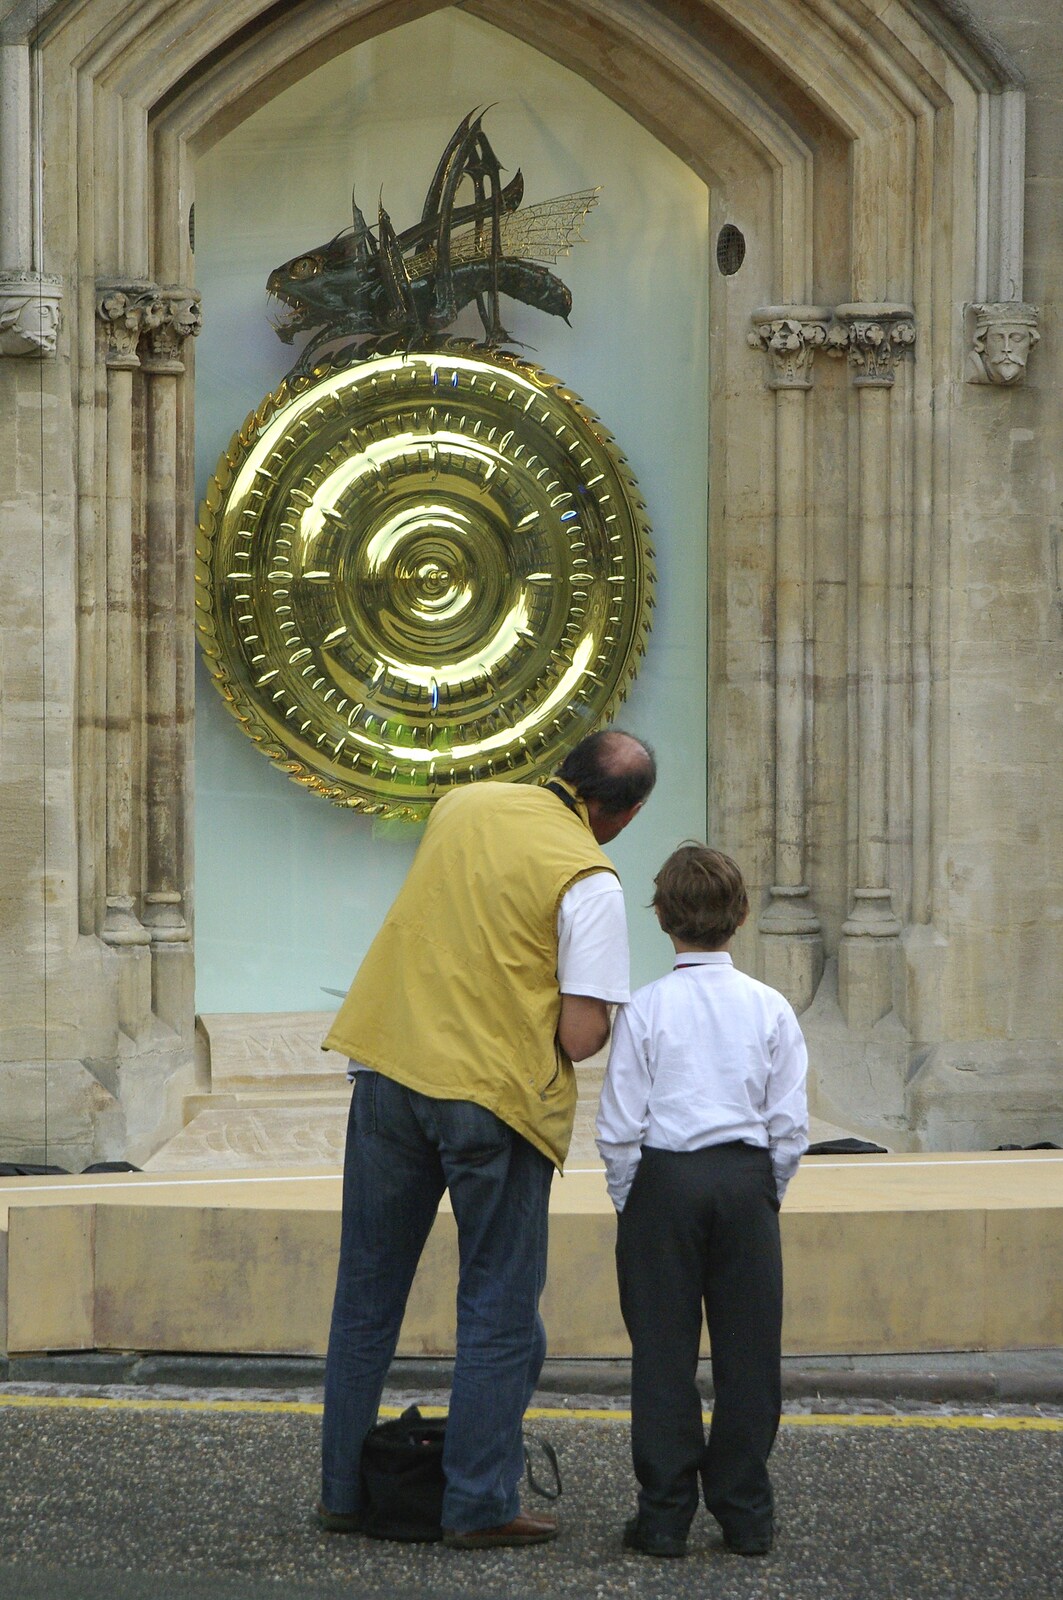 A Brief Time in History: Stephen Hawking and the Corpus Christi Clock, Benet Street, Cambridge - 19th September 2008: Watching the clock